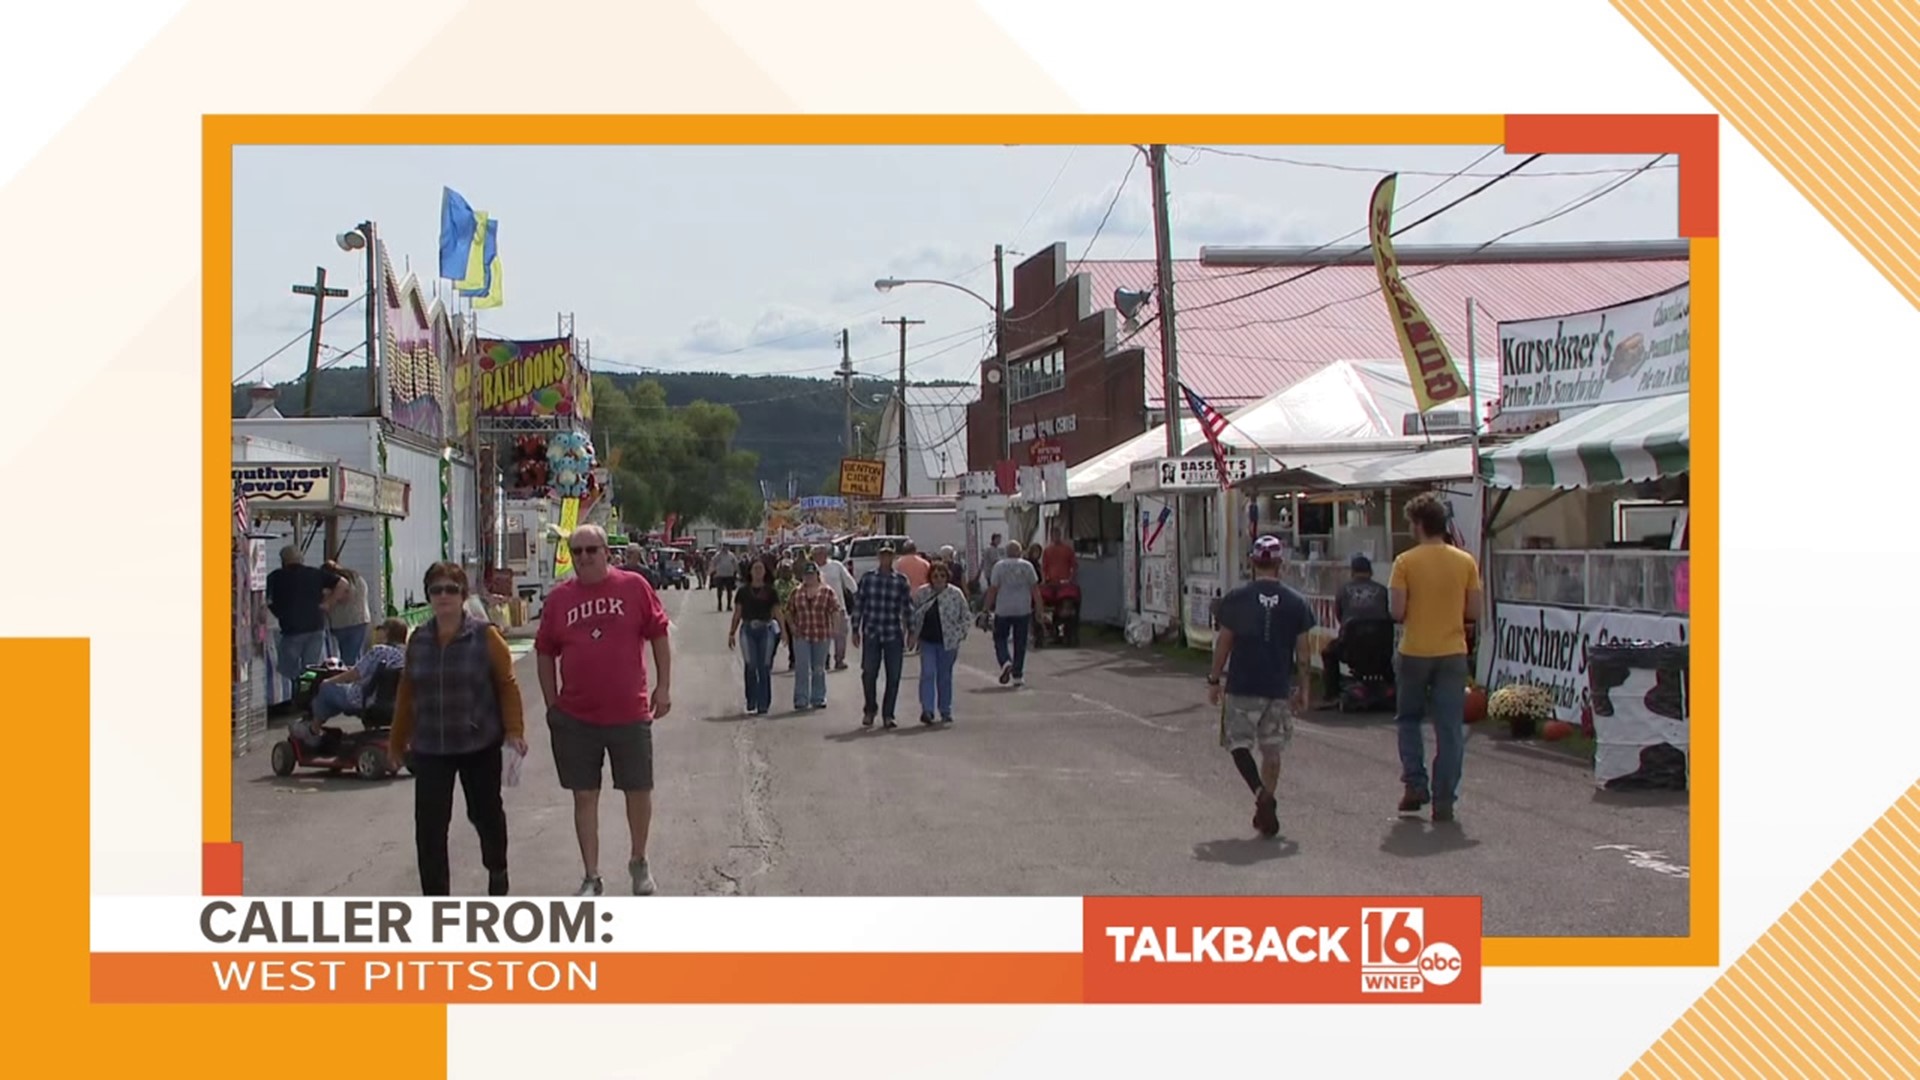 Callers are commenting on the return of the Bloomsburg Fair, compliments for members of Newswatch 16, and aliens?